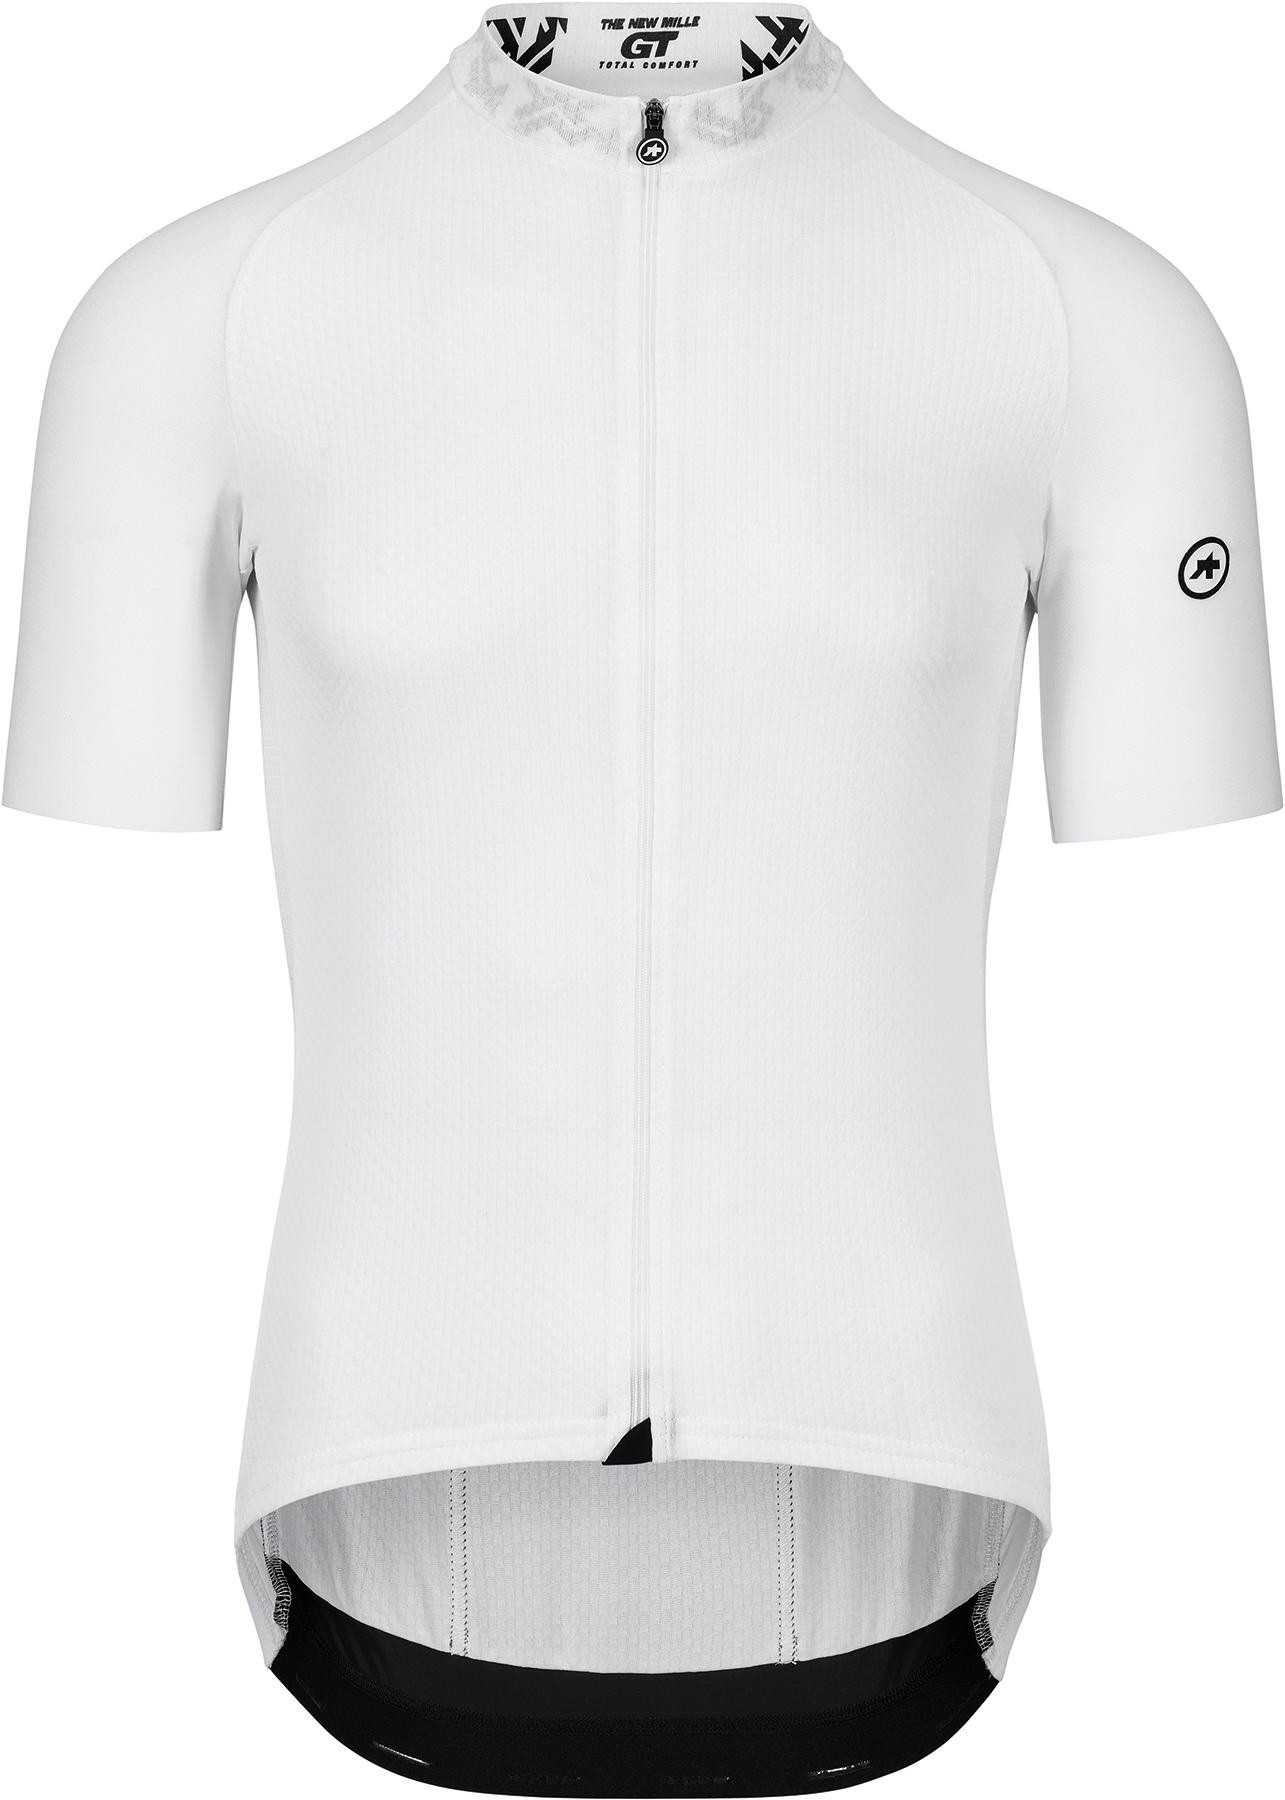 Assos Mille Gt Summer C2 Short Sleeve Cycling Jersey - Holy White